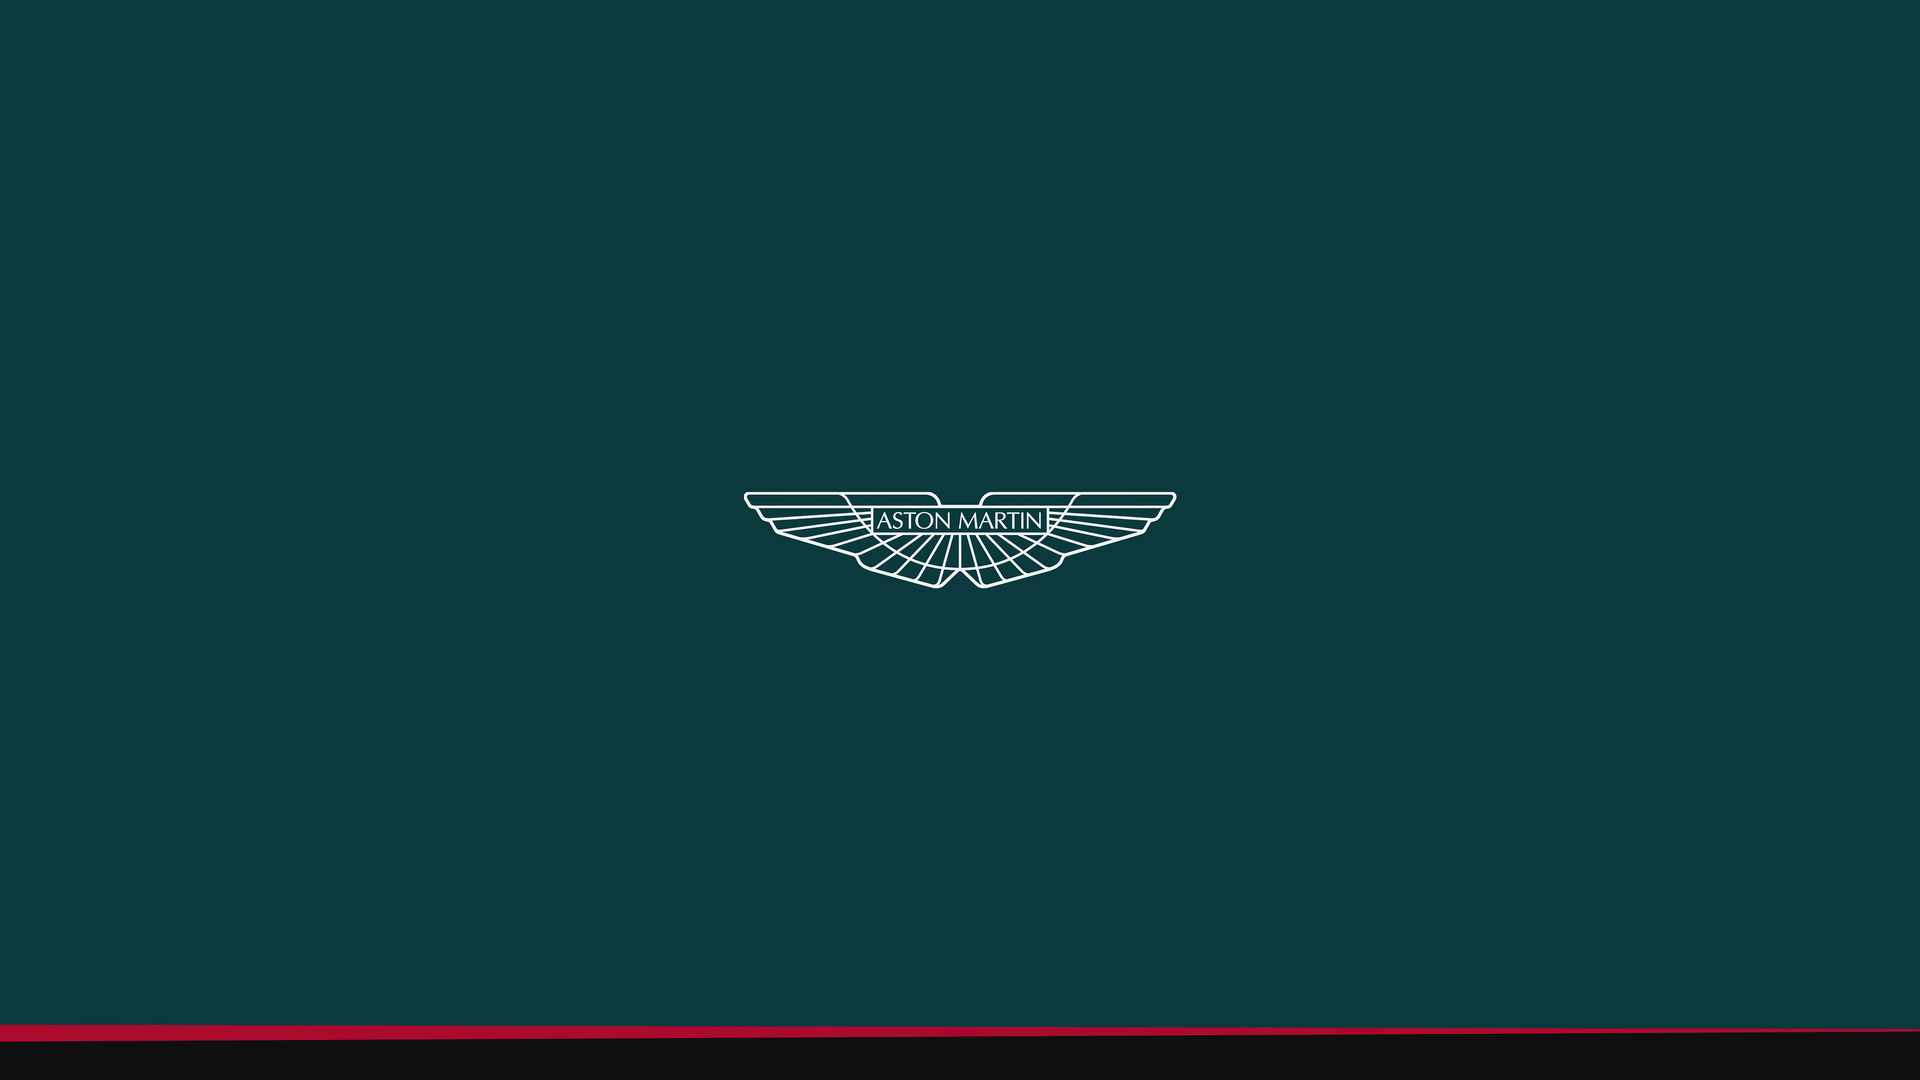 1920x1080 Aston Martin Minimal Logo 5k Laptop Full Hd 1080p Hd 4k Wallpapers Images Backgrounds Photos And Pictures